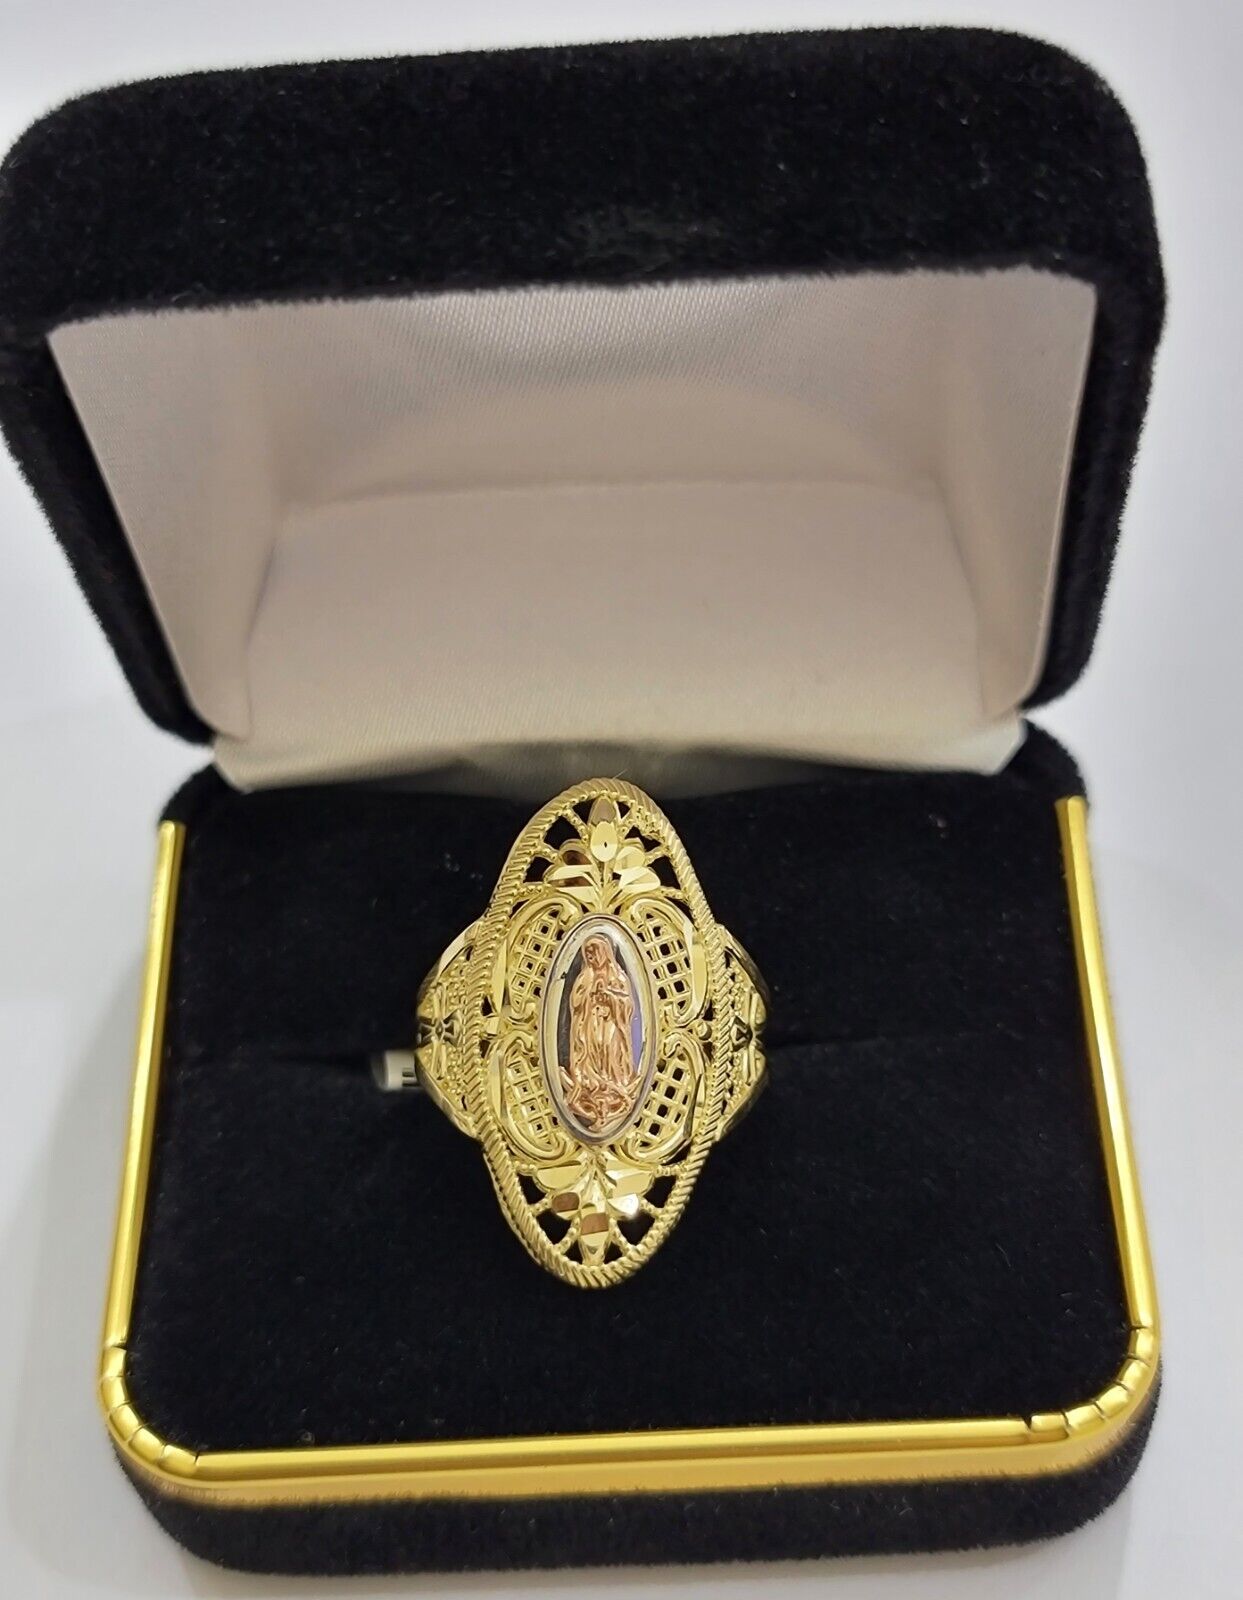 Ladies Ring 10k Yellow Gold Virgin Mary Cross 10KT REAL Gold Unique Size 7 SALE